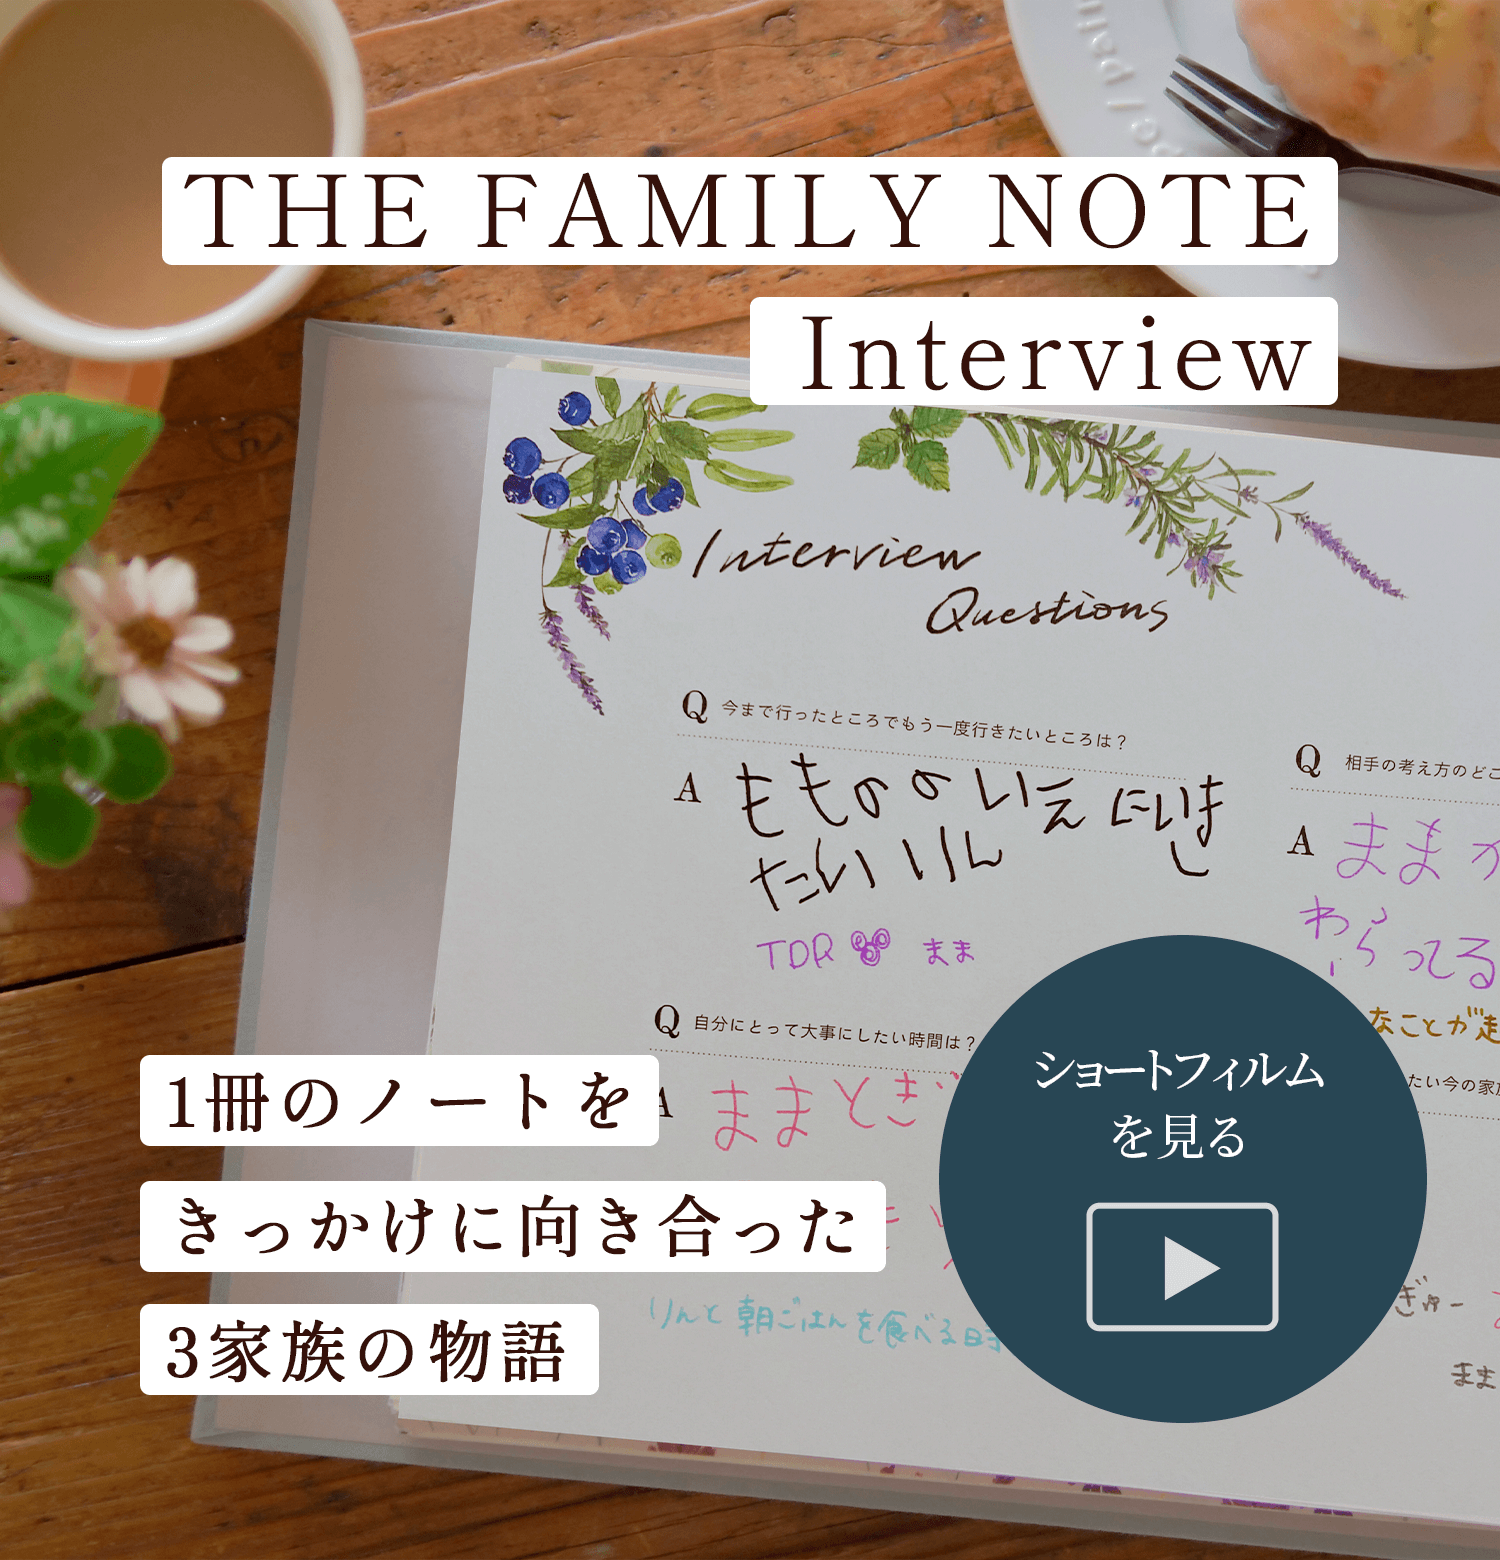 THE FAMILY NOTE Interview 1冊のノートをきっかけに向き合った、3家族の物語。